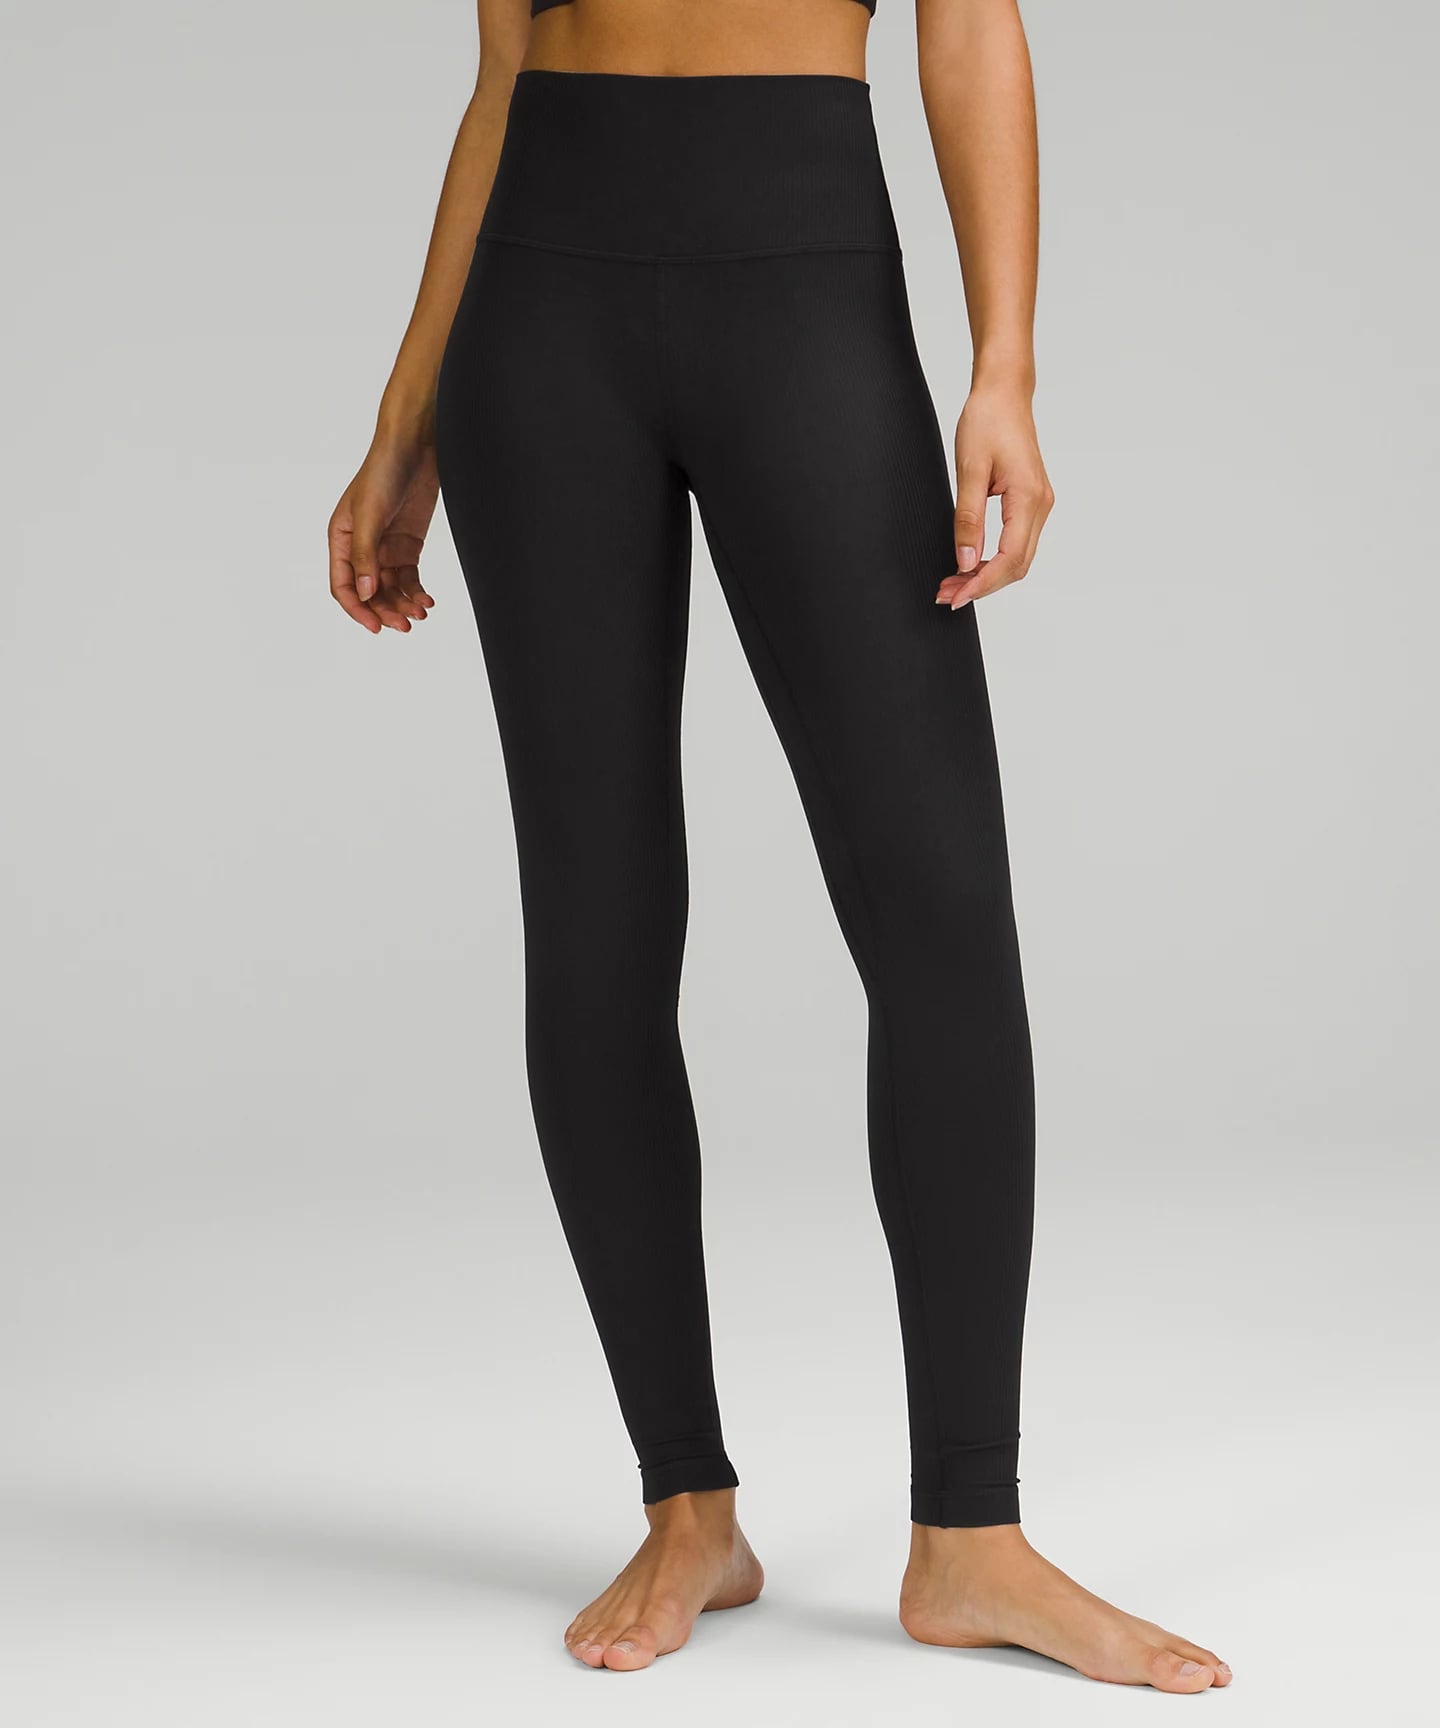 Lululemon introduces super smooth leggings perfect for yoga and beyond -  ABC News